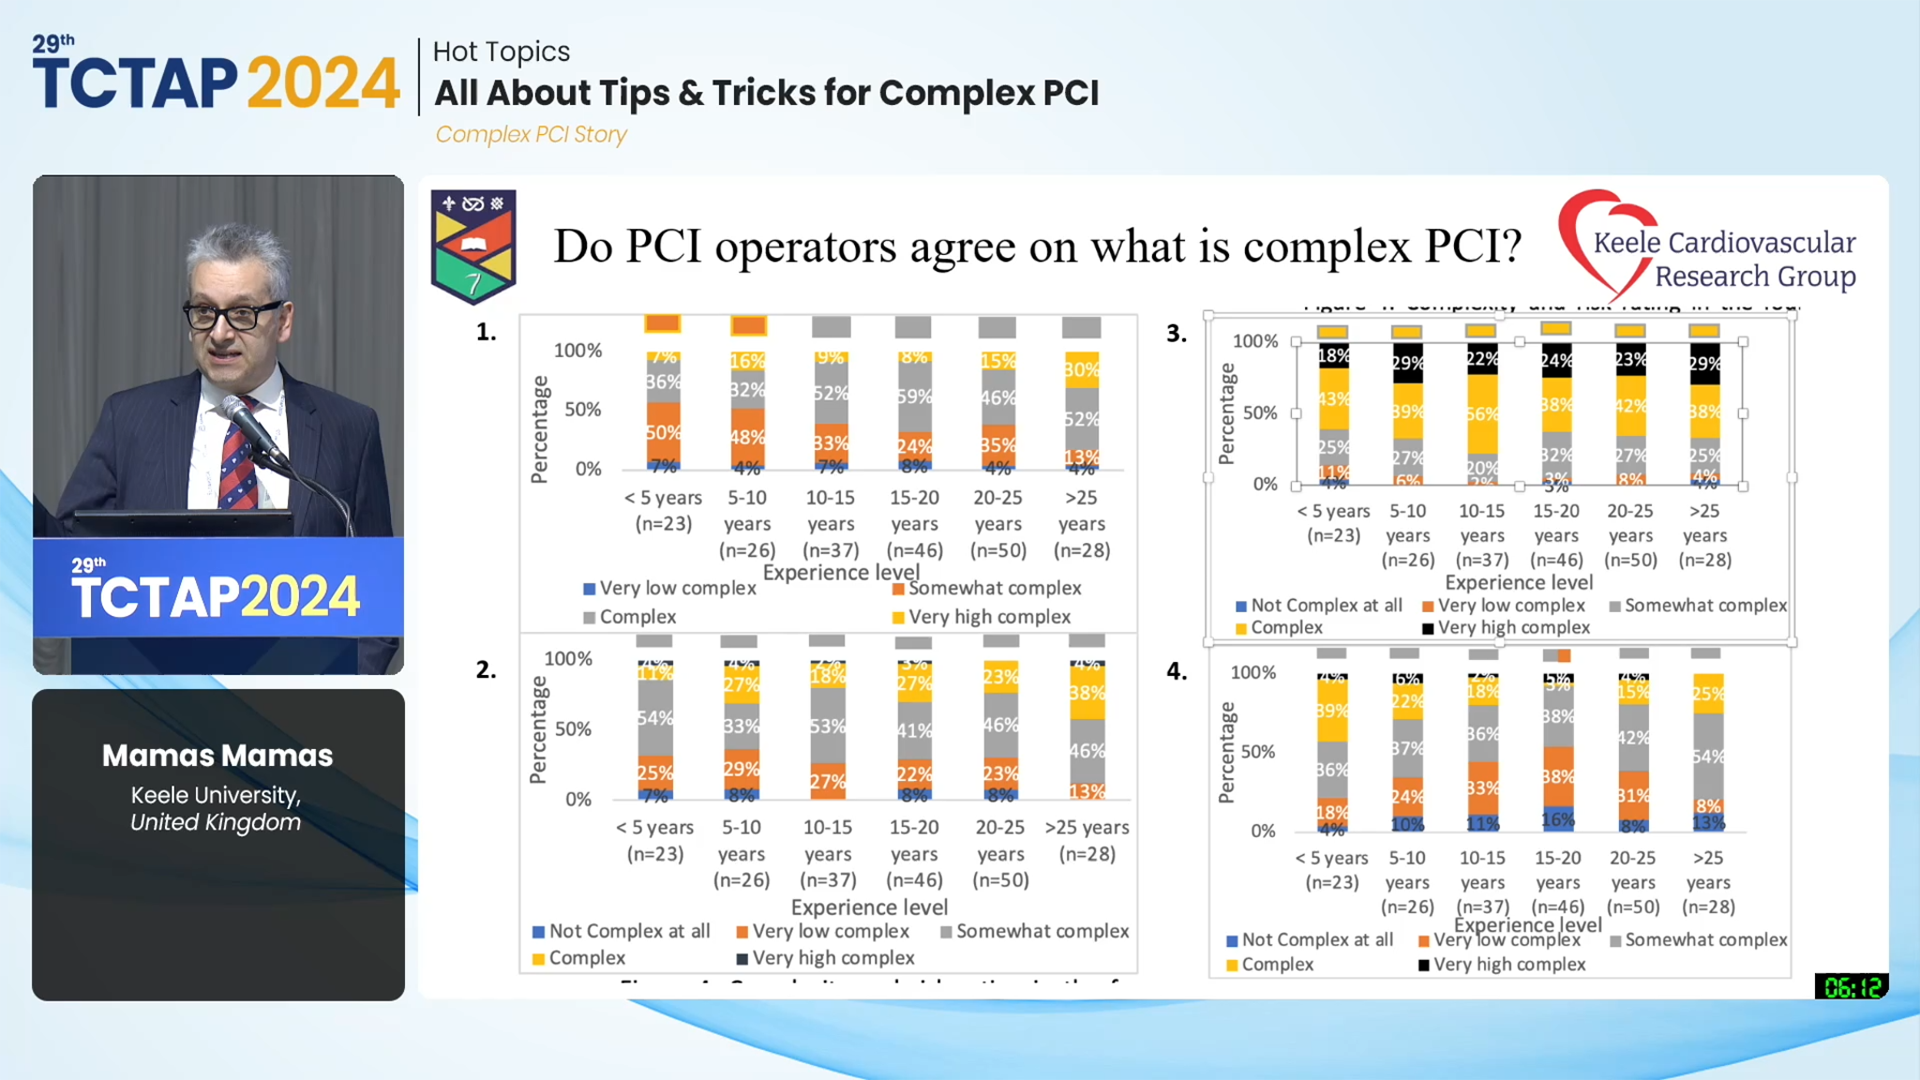 [Hot Topics] All About Tips & Tricks for Complex PCI